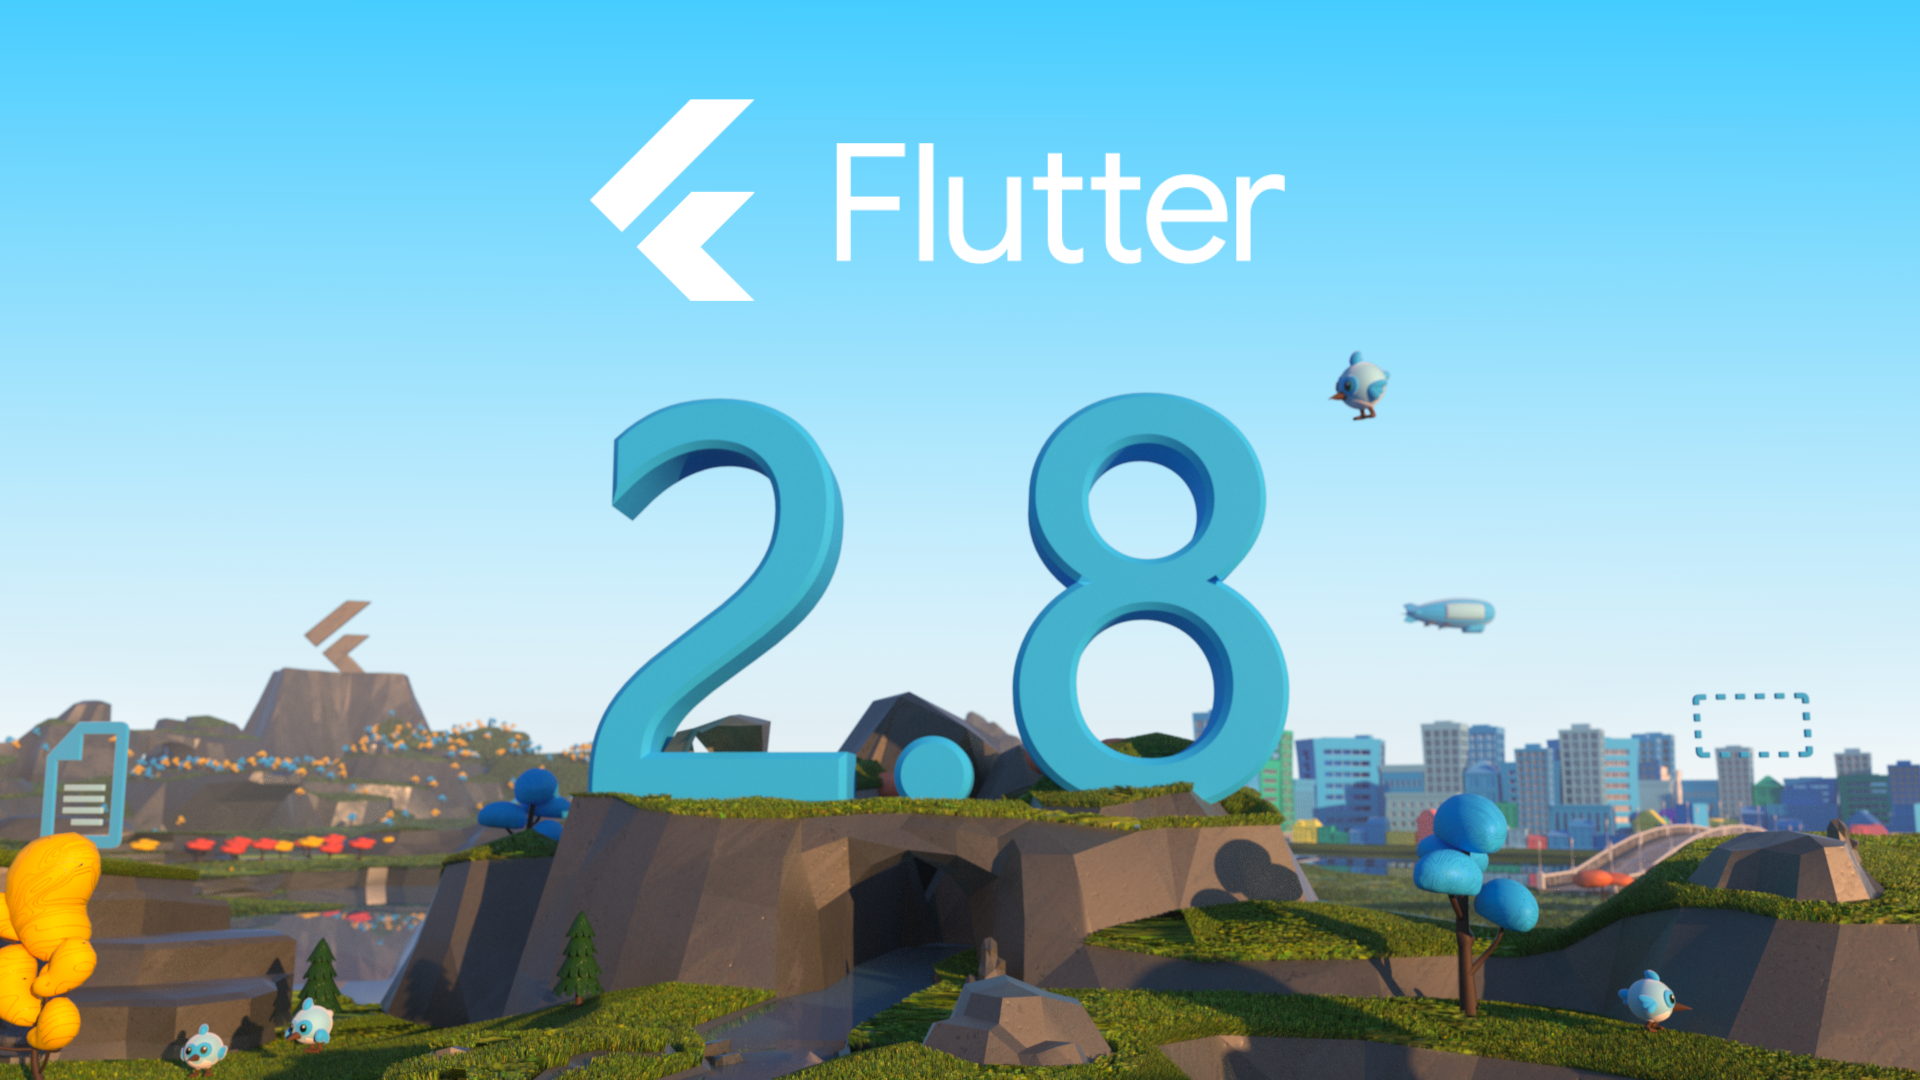 Flutter 2.8 brings performance boost and new Dart features - 9to5Google